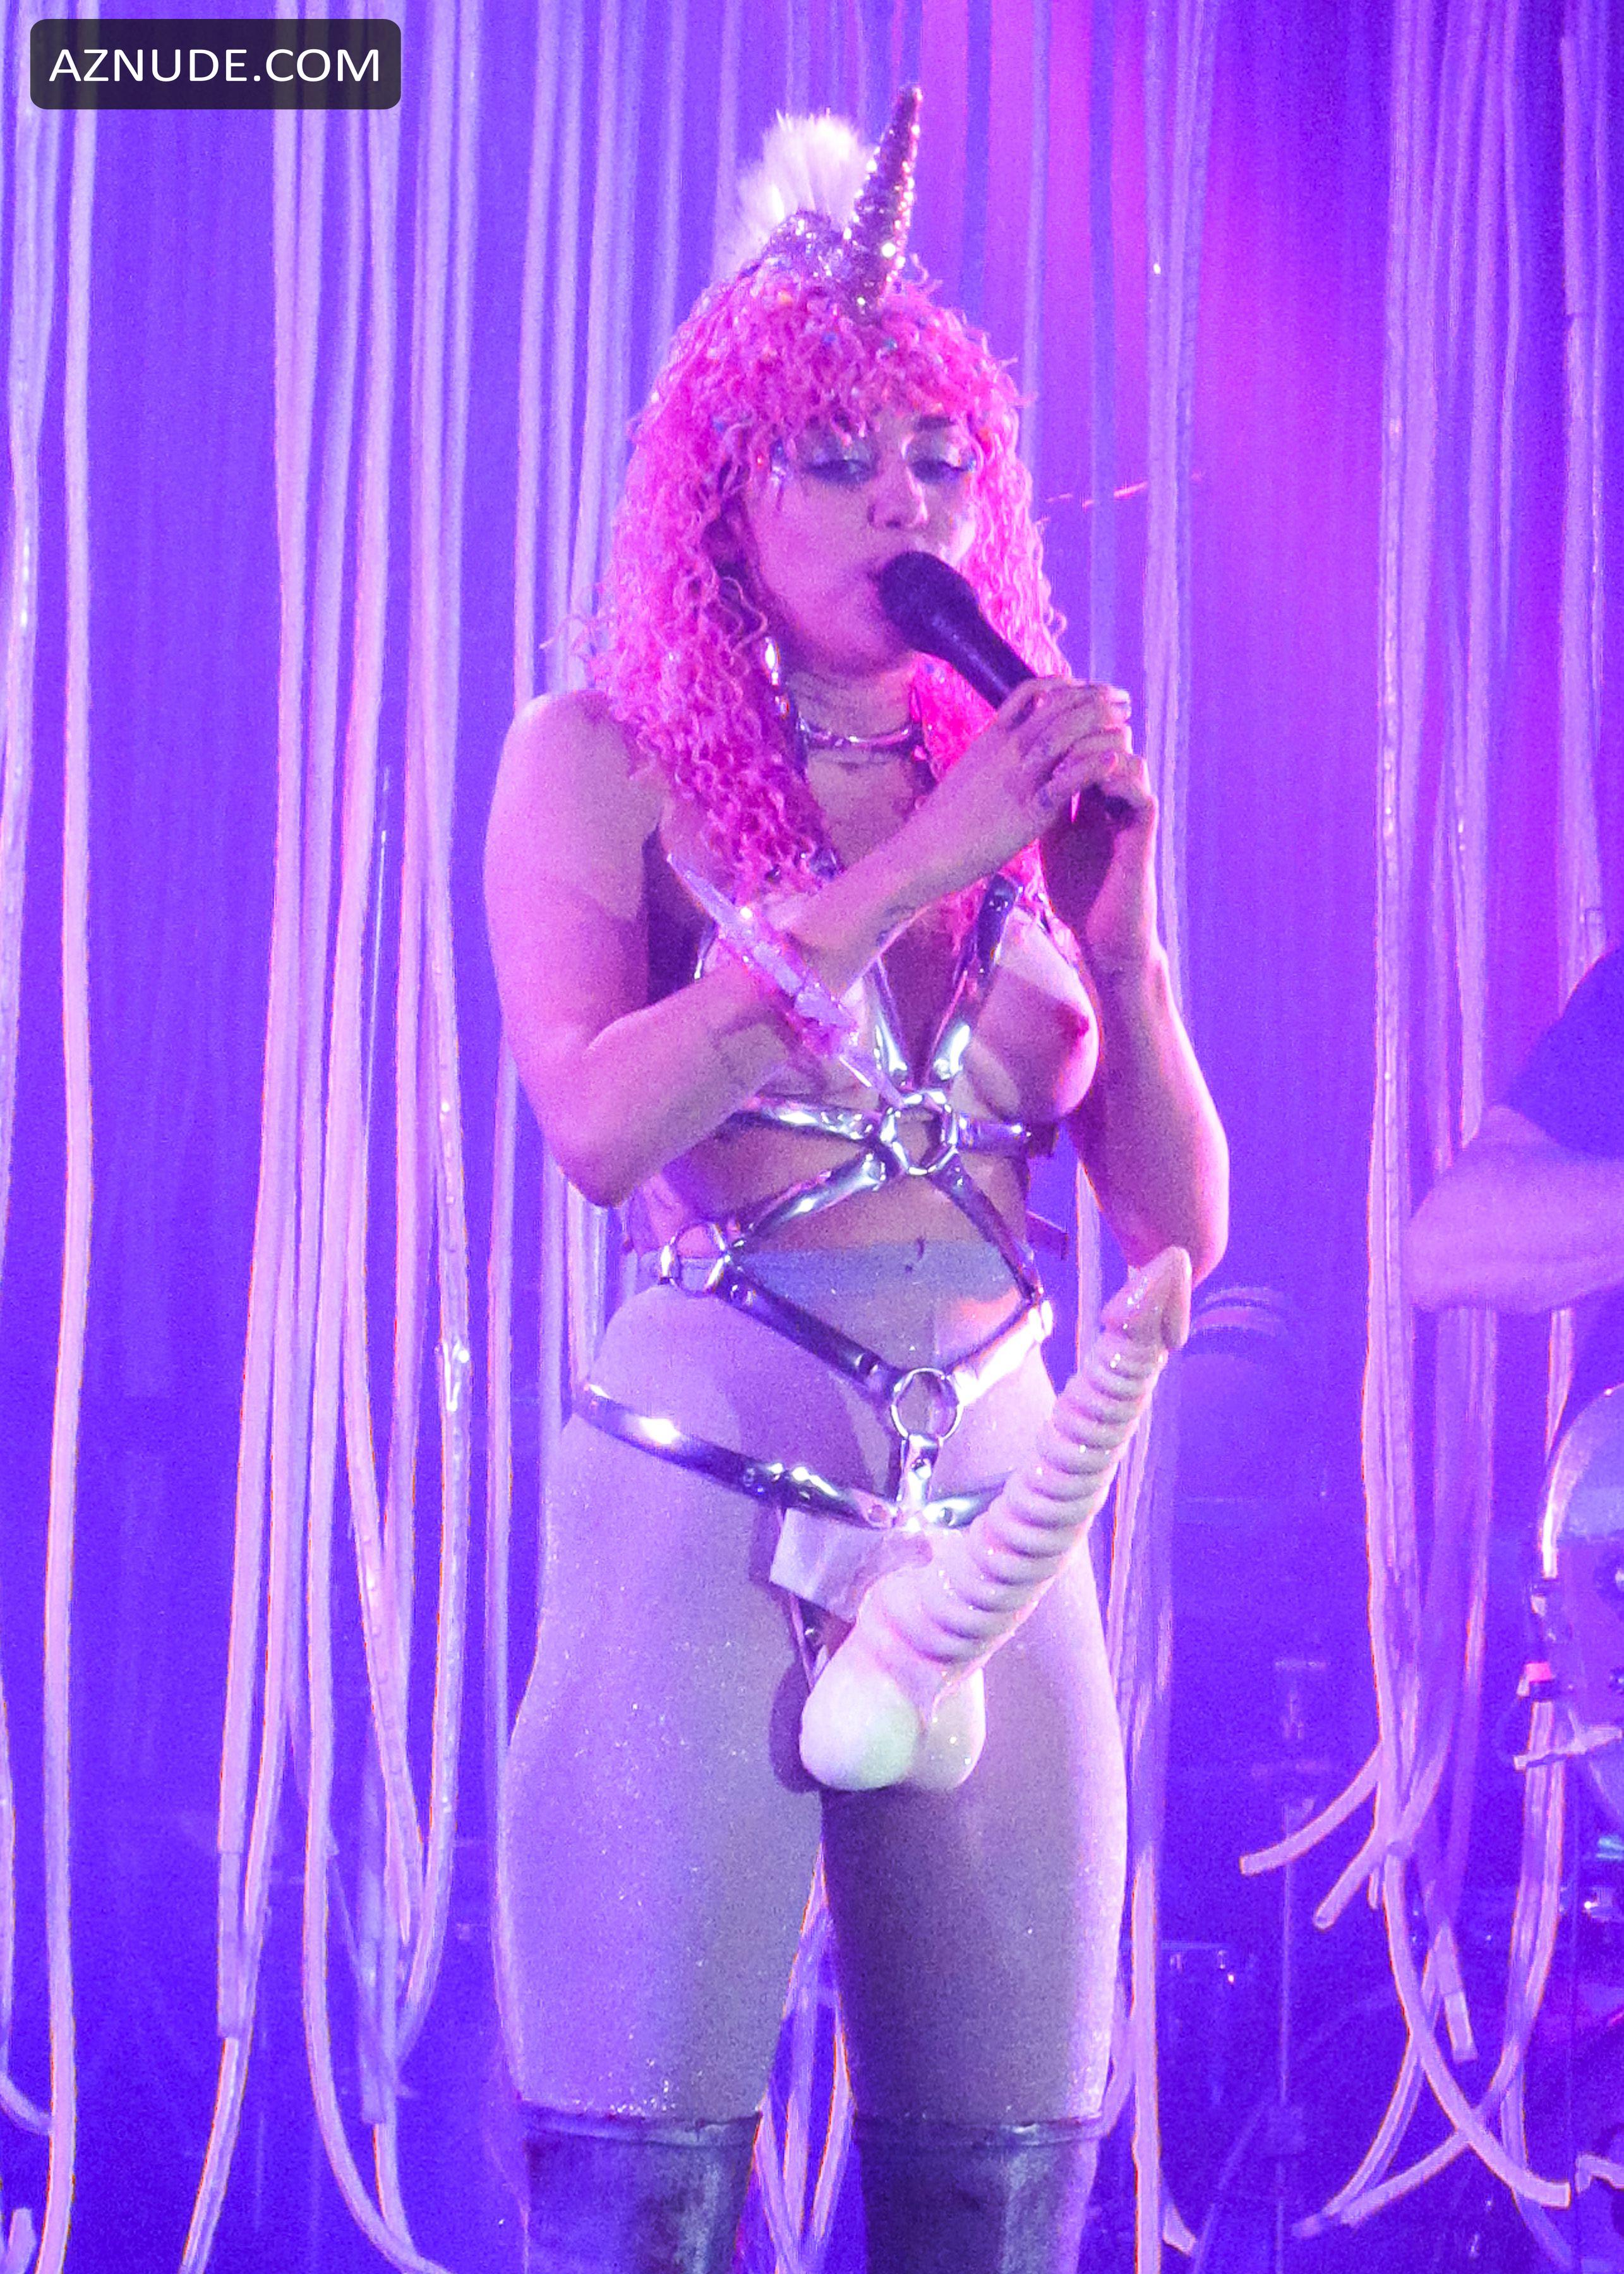 Miley Cyrus Performs Live At Echostage In Washington Dc 27 11 2015